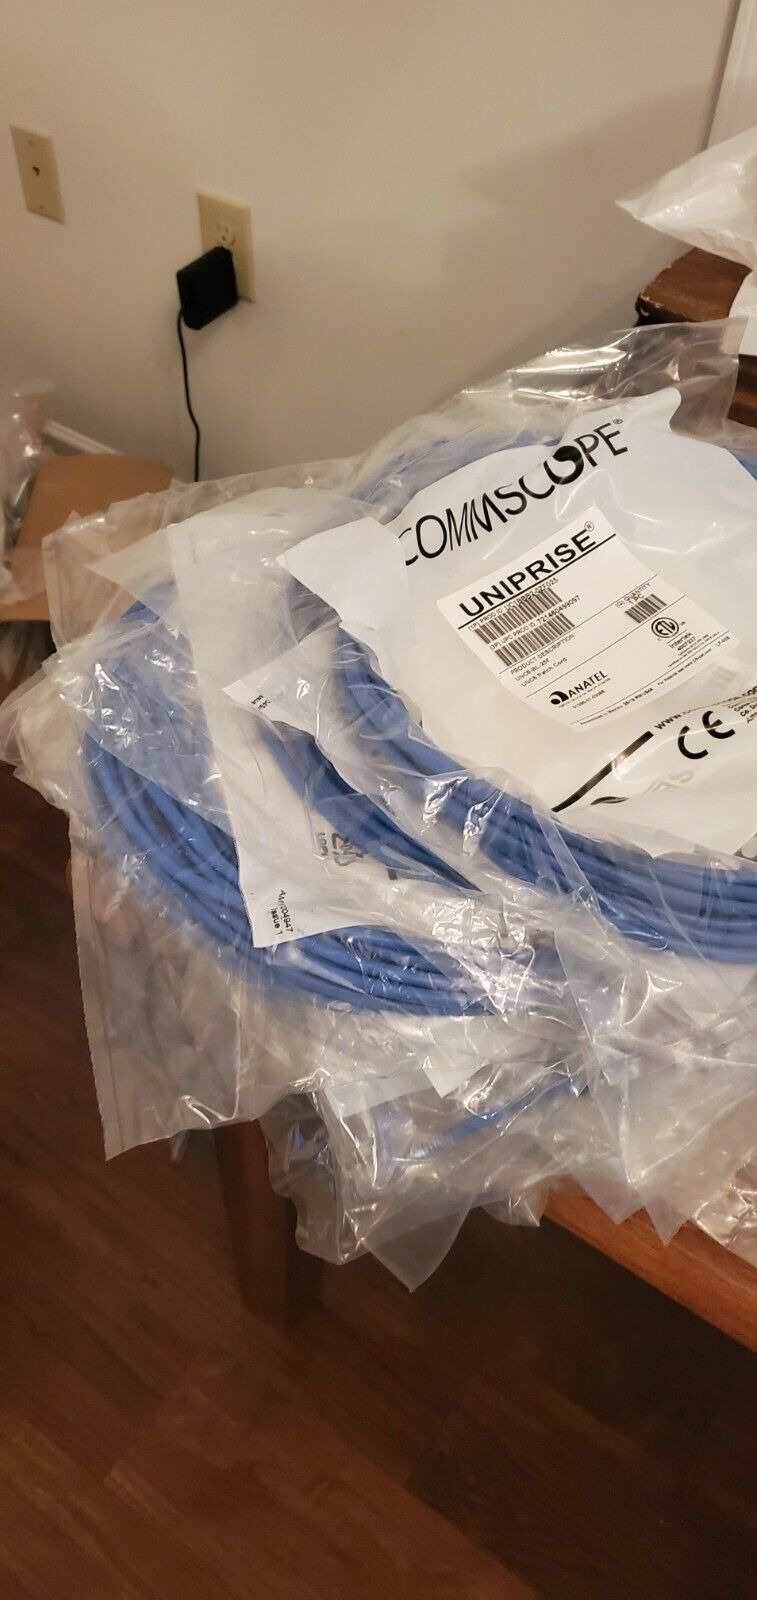 5 x Commscope UNC6-BL-25F 25 Feet Patch Cables 